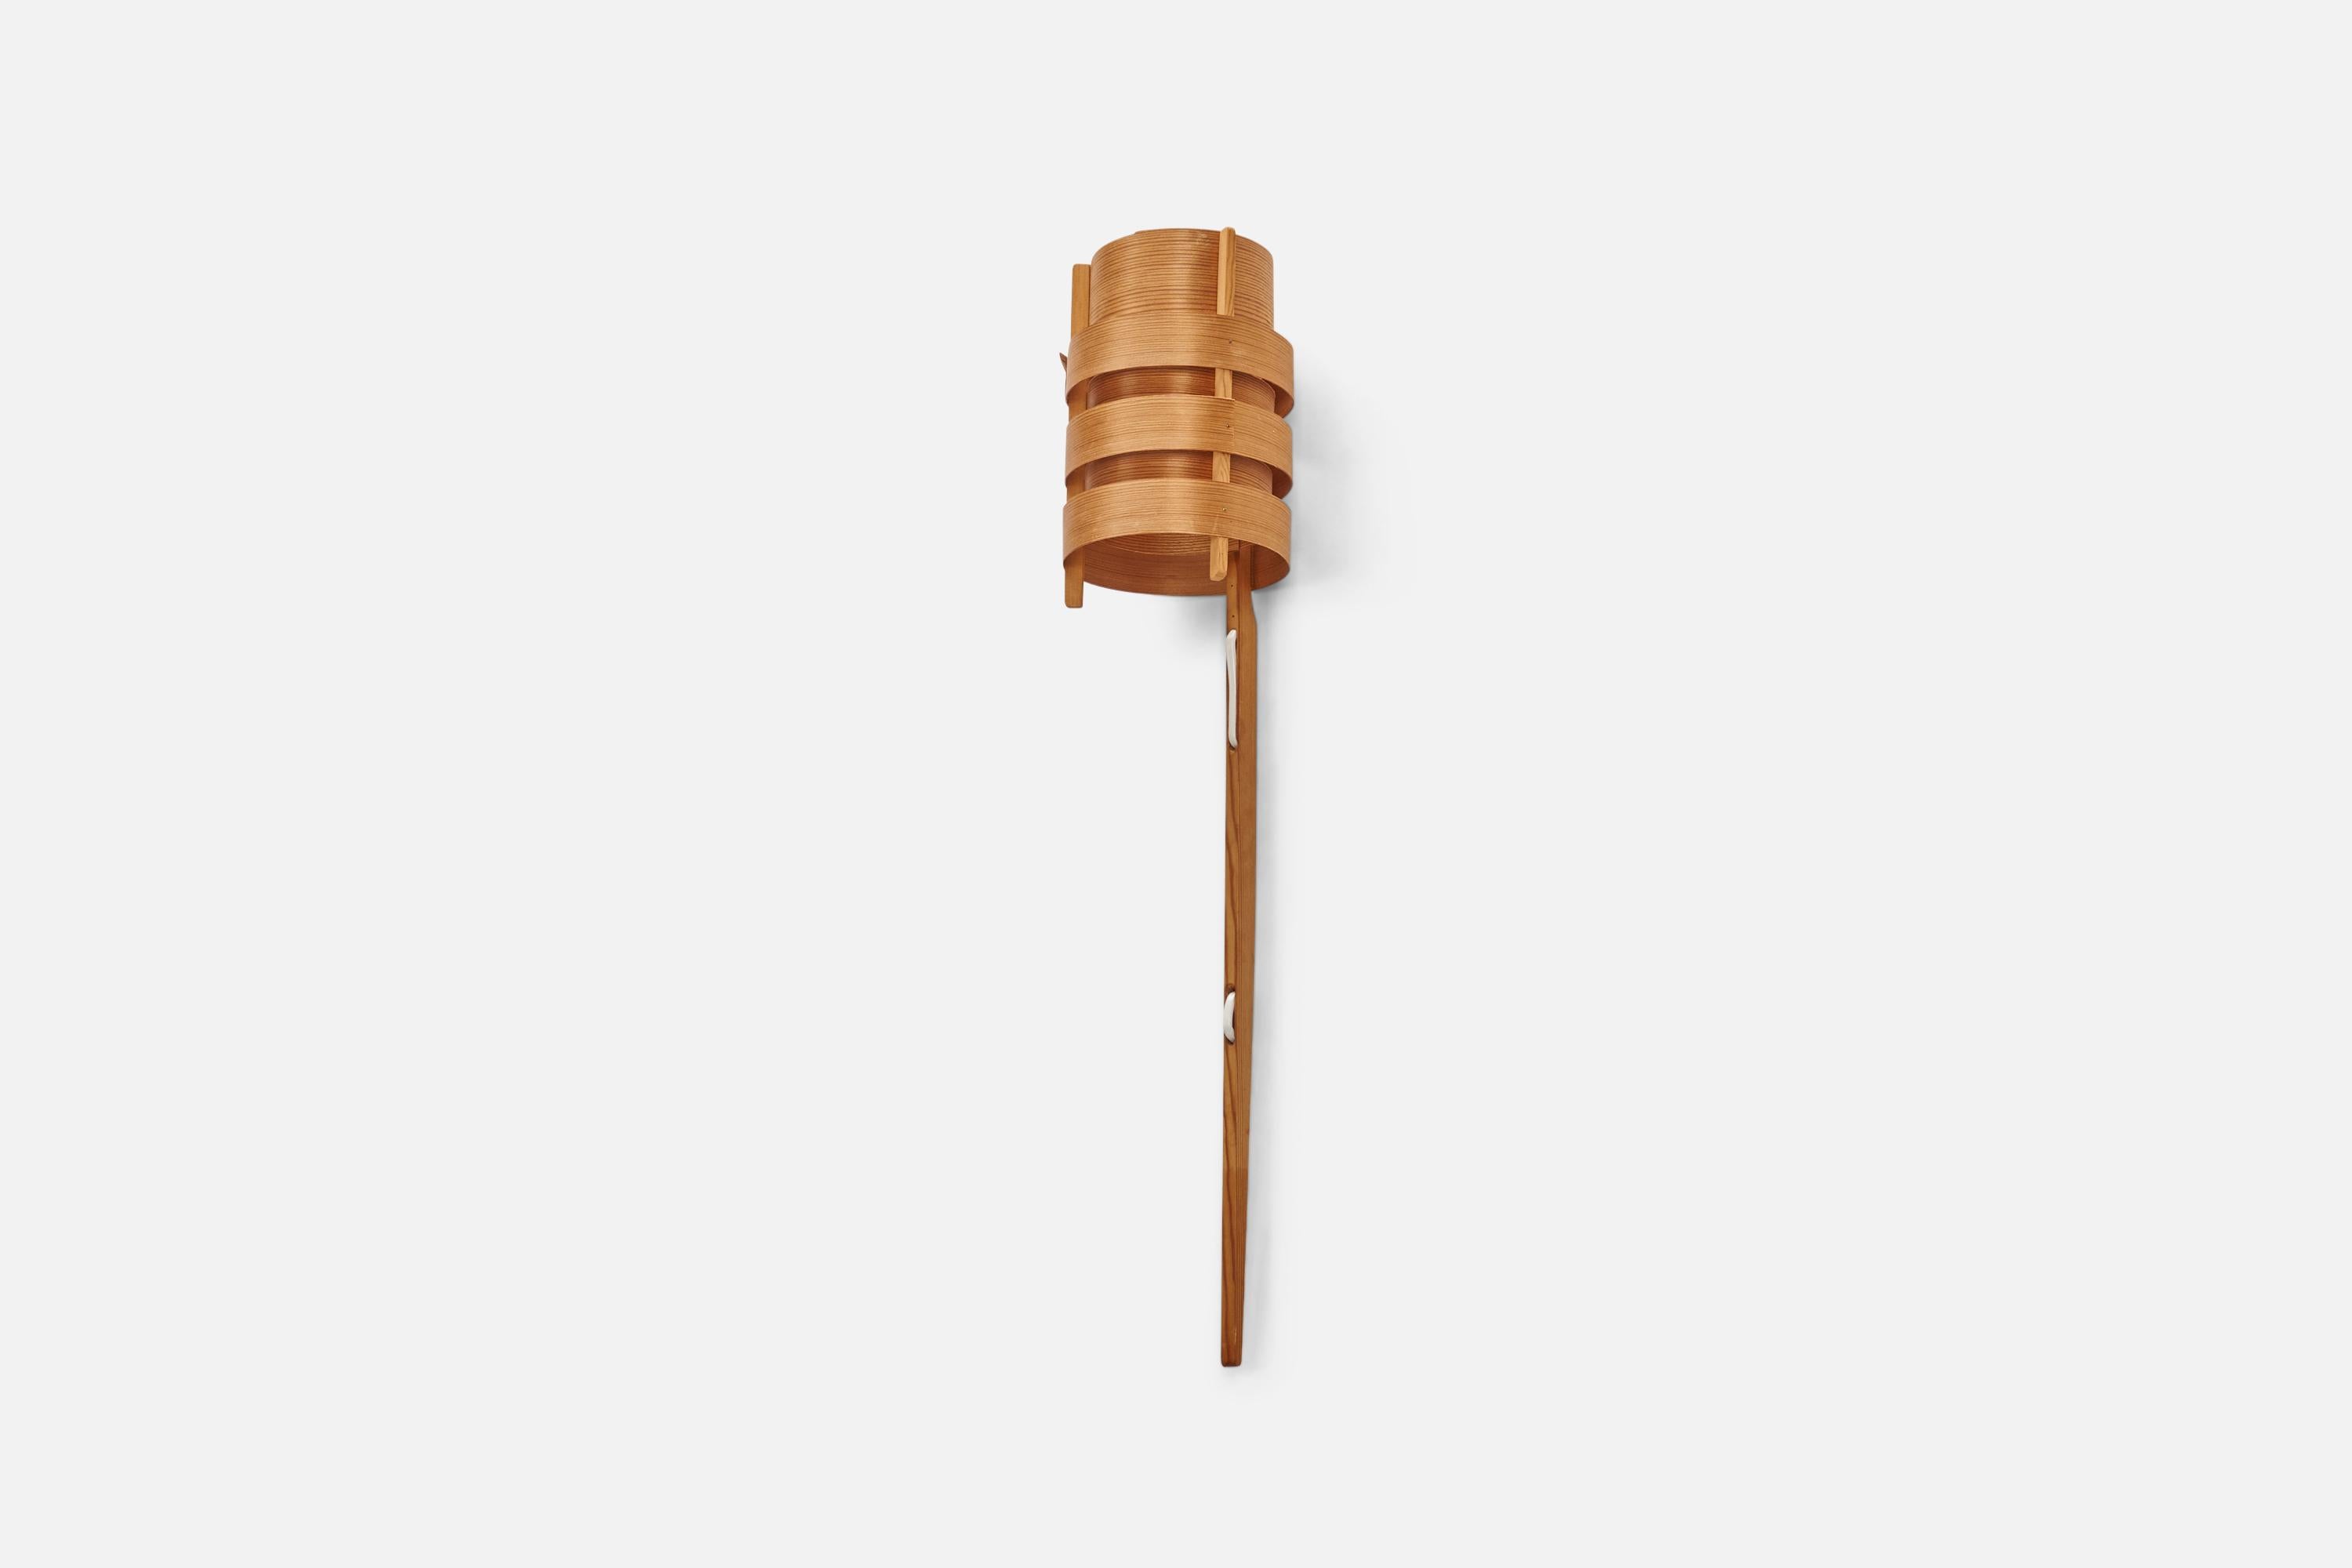 A moulded veneer pine wall light/sconce, designed by Hans-Agne Jakobsson and produced by AB Ellysett in Sweden, 1970s.

Likely originally intended as a flower pot light, later fitting attached to utilise as a wall light. Configured for plug